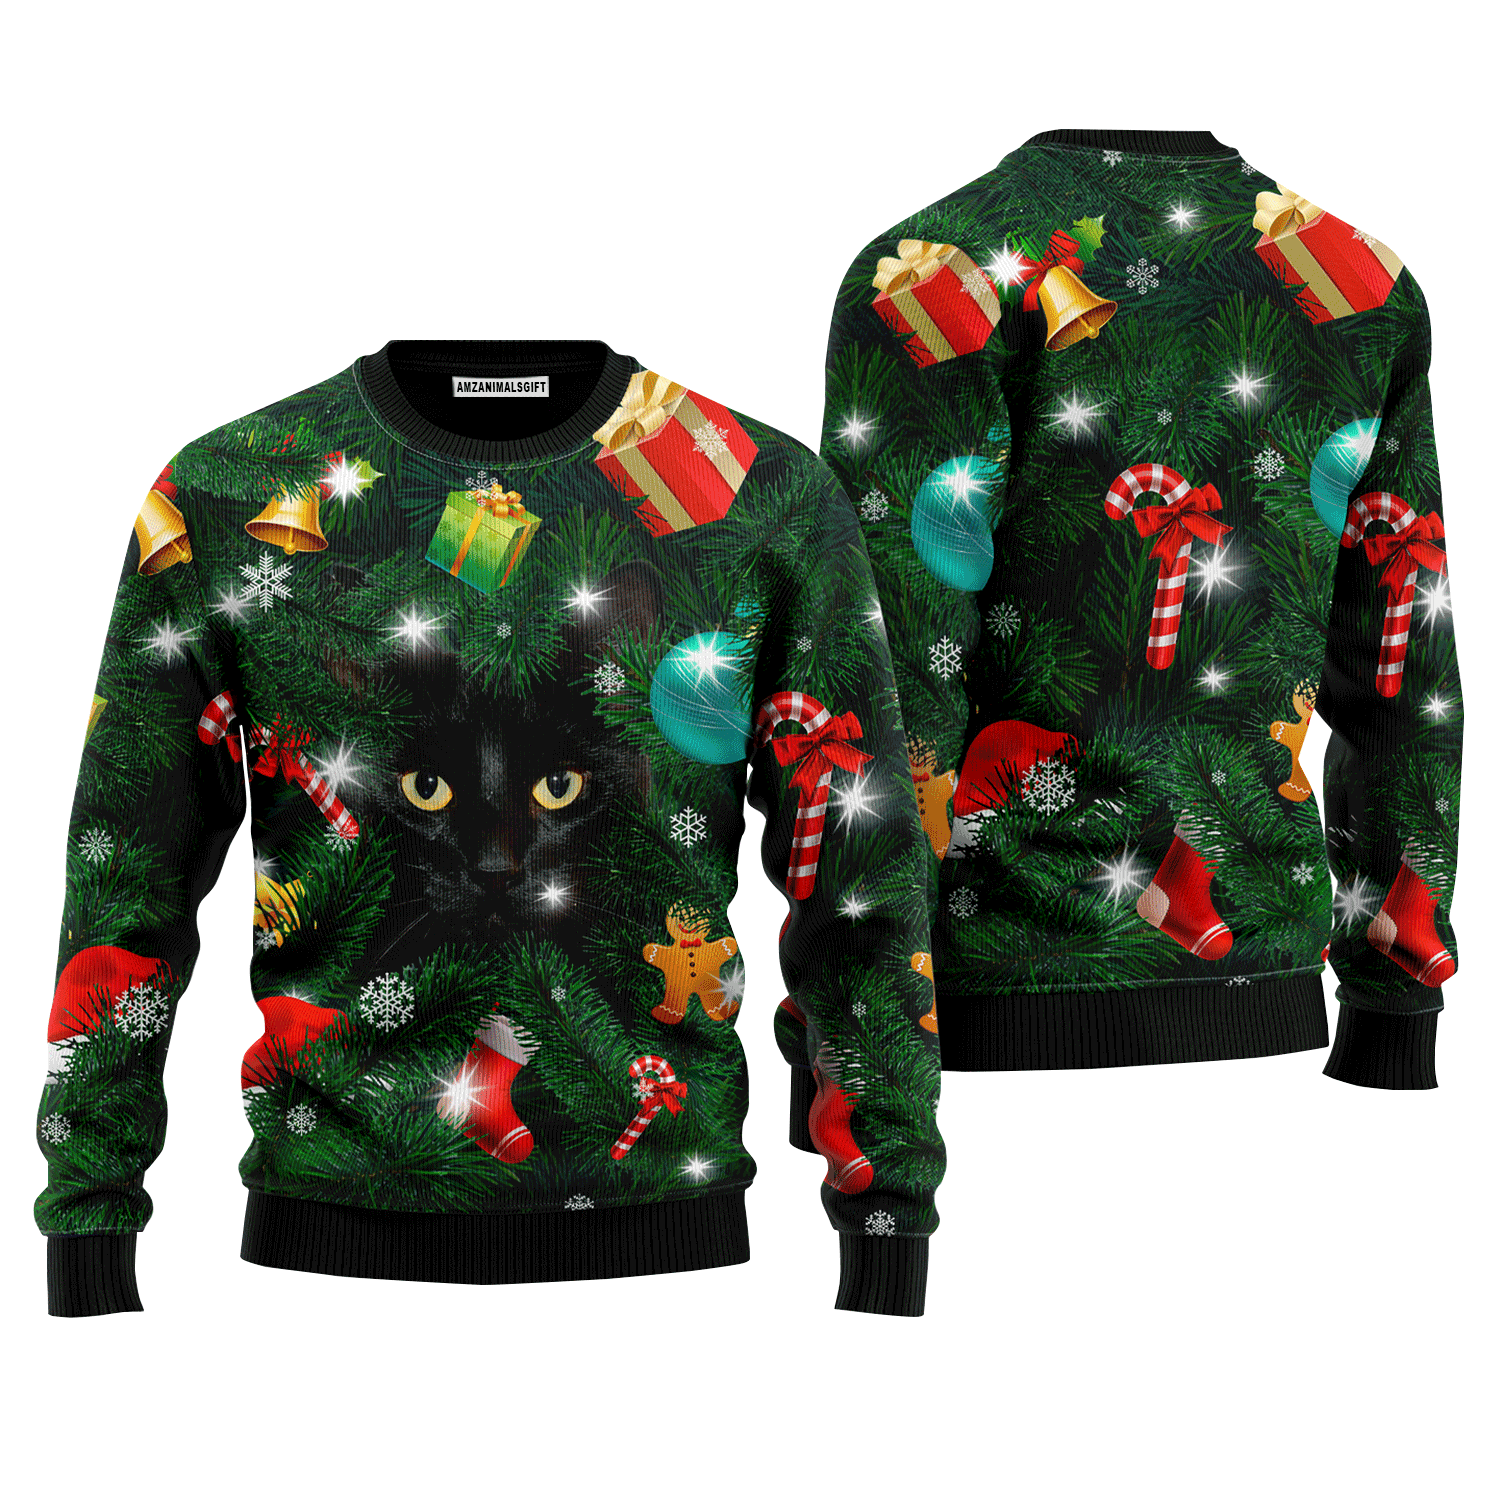 Black Cat Inside Tree Sweater, Ugly Christmas Sweater For Men & Women, Perfect Outfit For Christmas New Year Autumn Winter